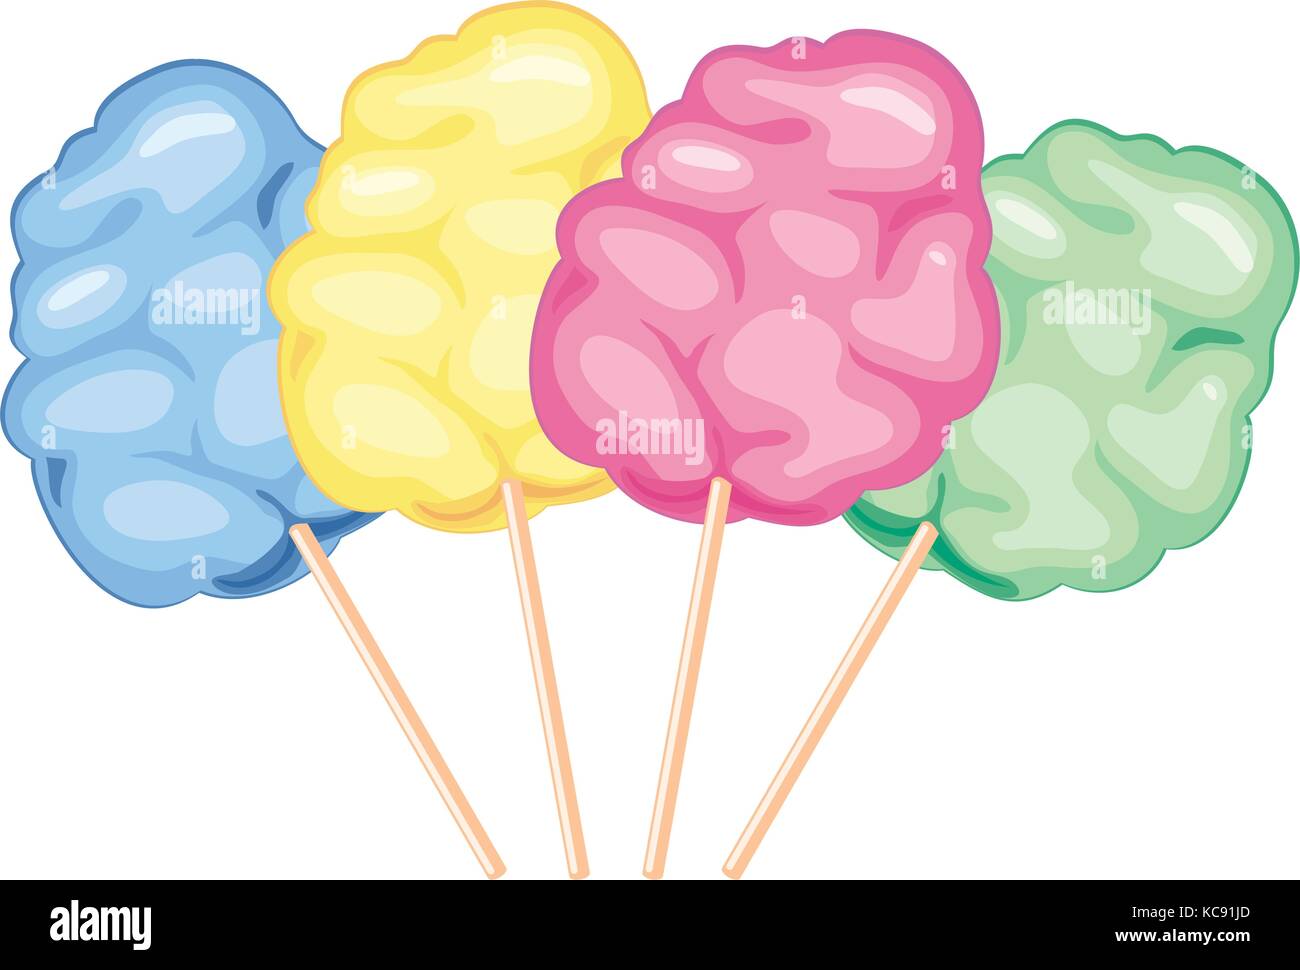 vector colorful candy cotton set isolated on white background. collection of sweet fluffy sugar clouds. Stock Vector